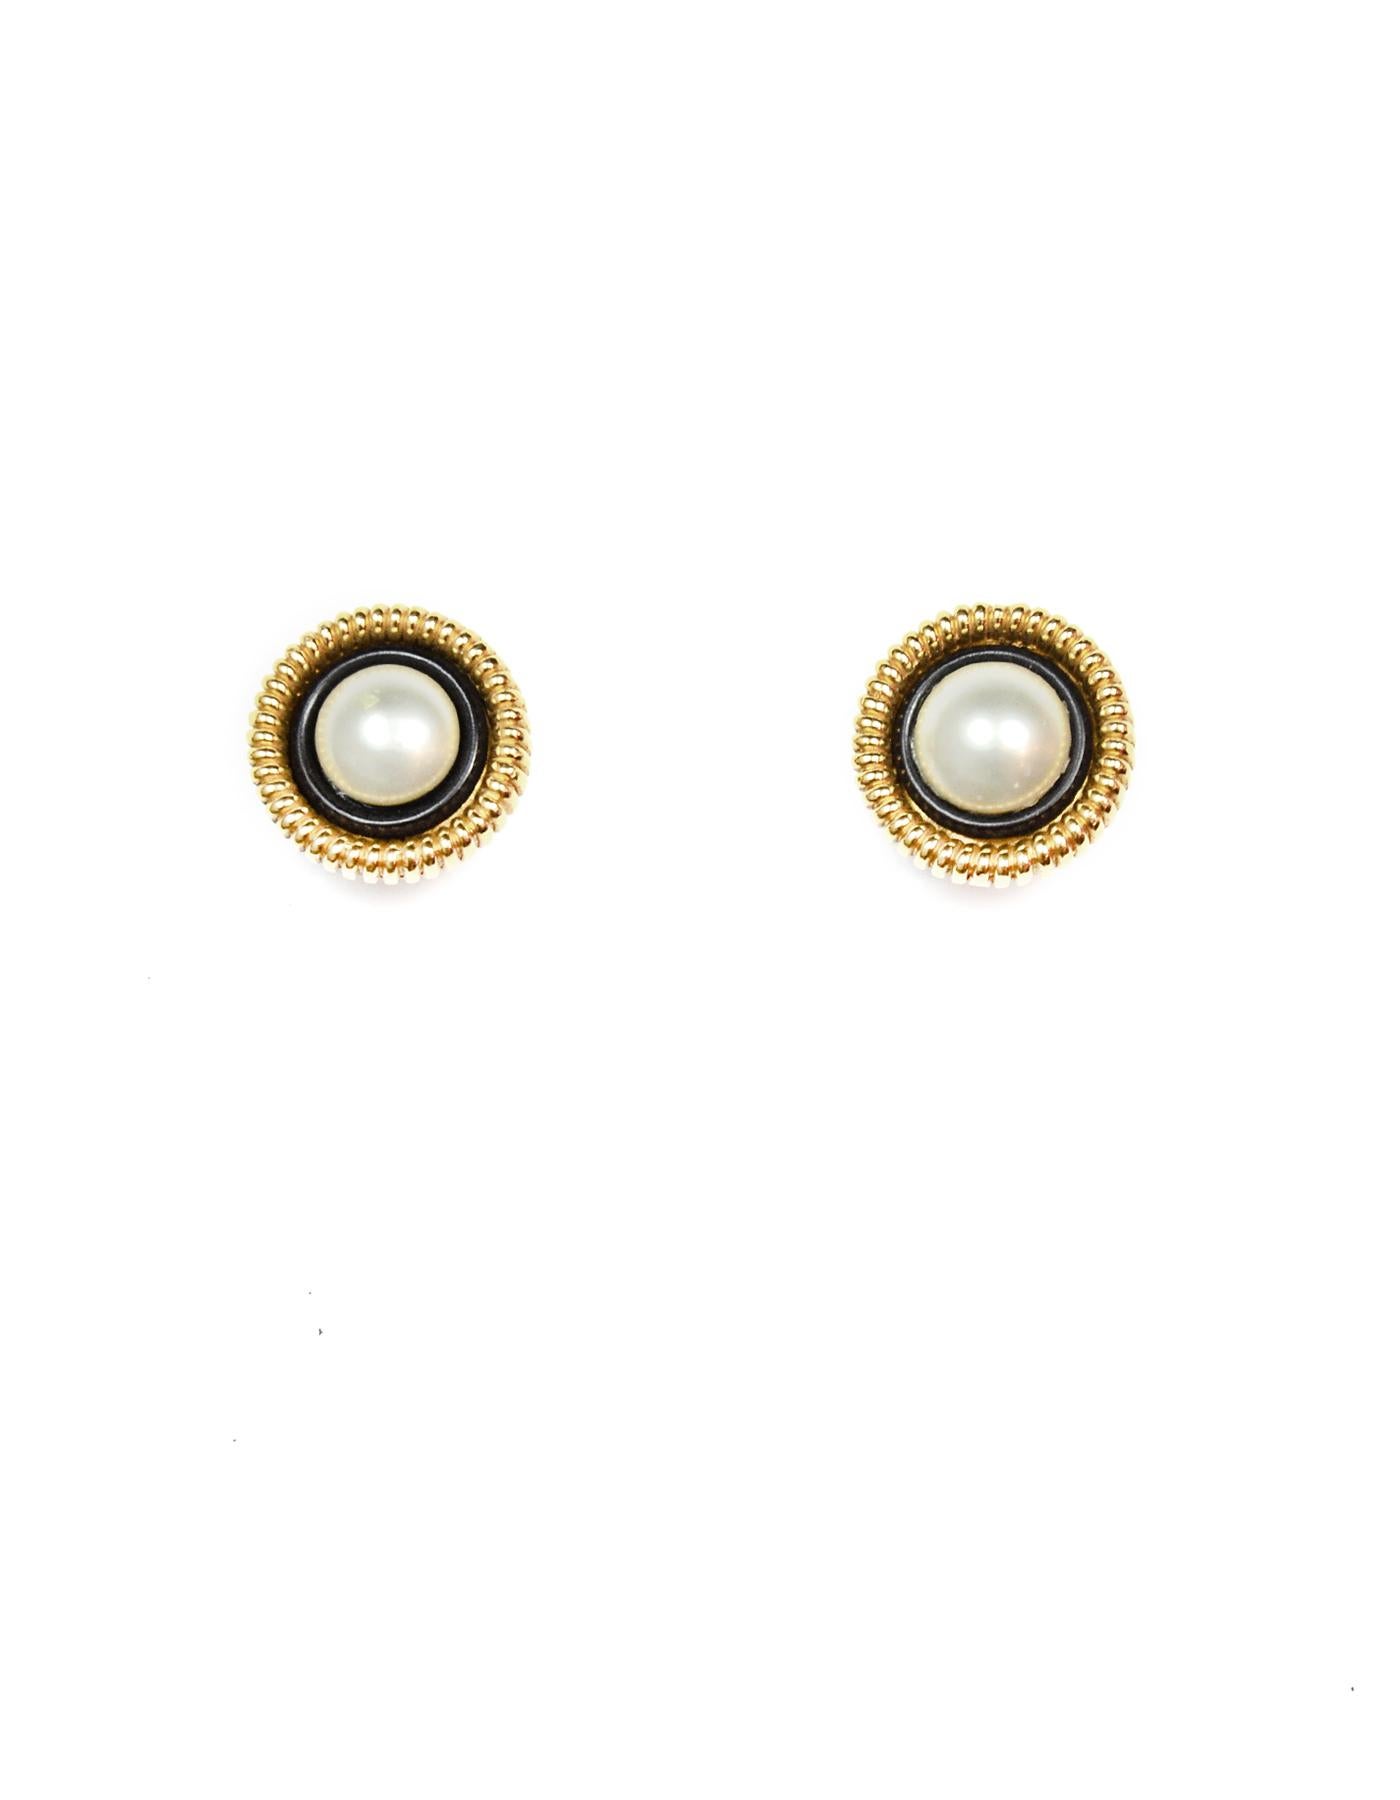 Chanel Vintage Faux Pearl/Goldtone Clip On Earrings

Color: Gold, black, white
Materials:  Metal, faux pearl
Hallmarks:   